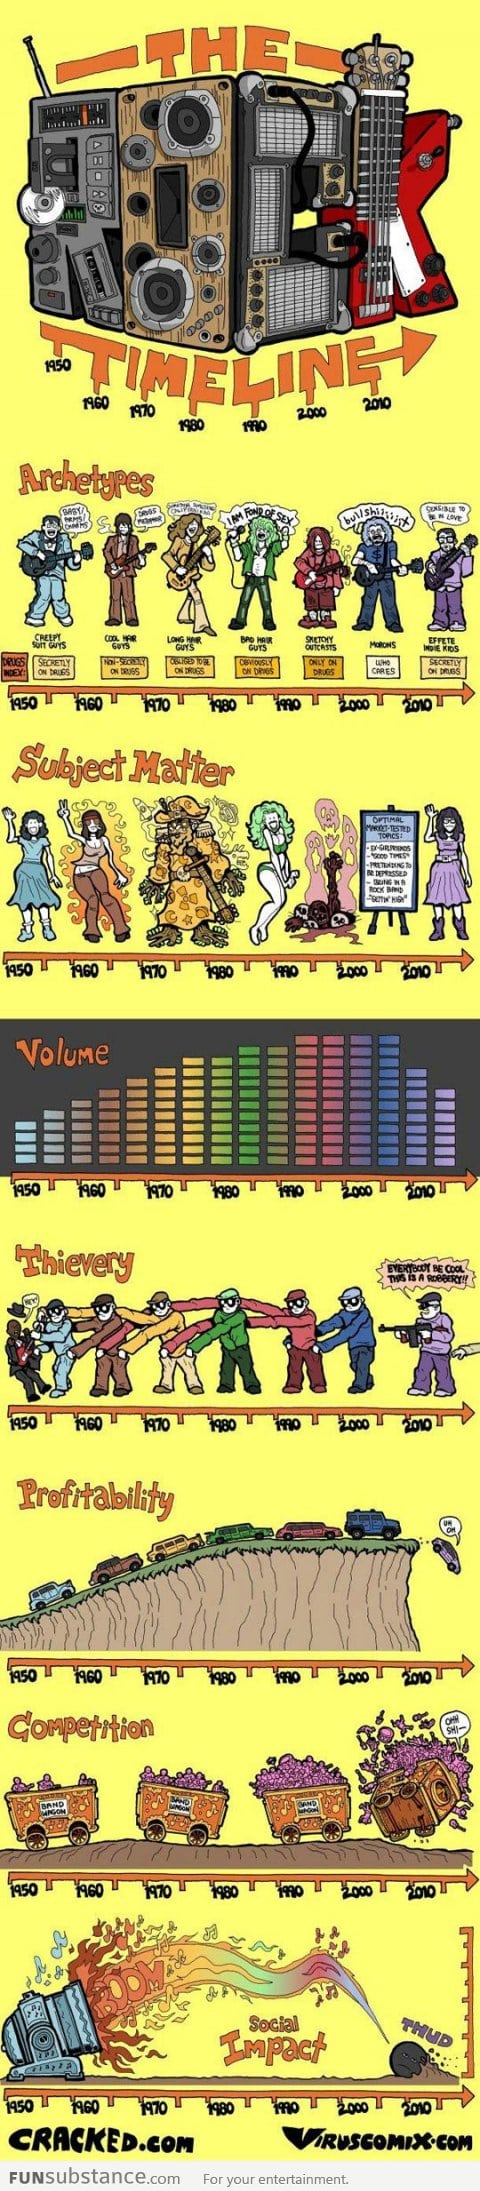 Music over the ages